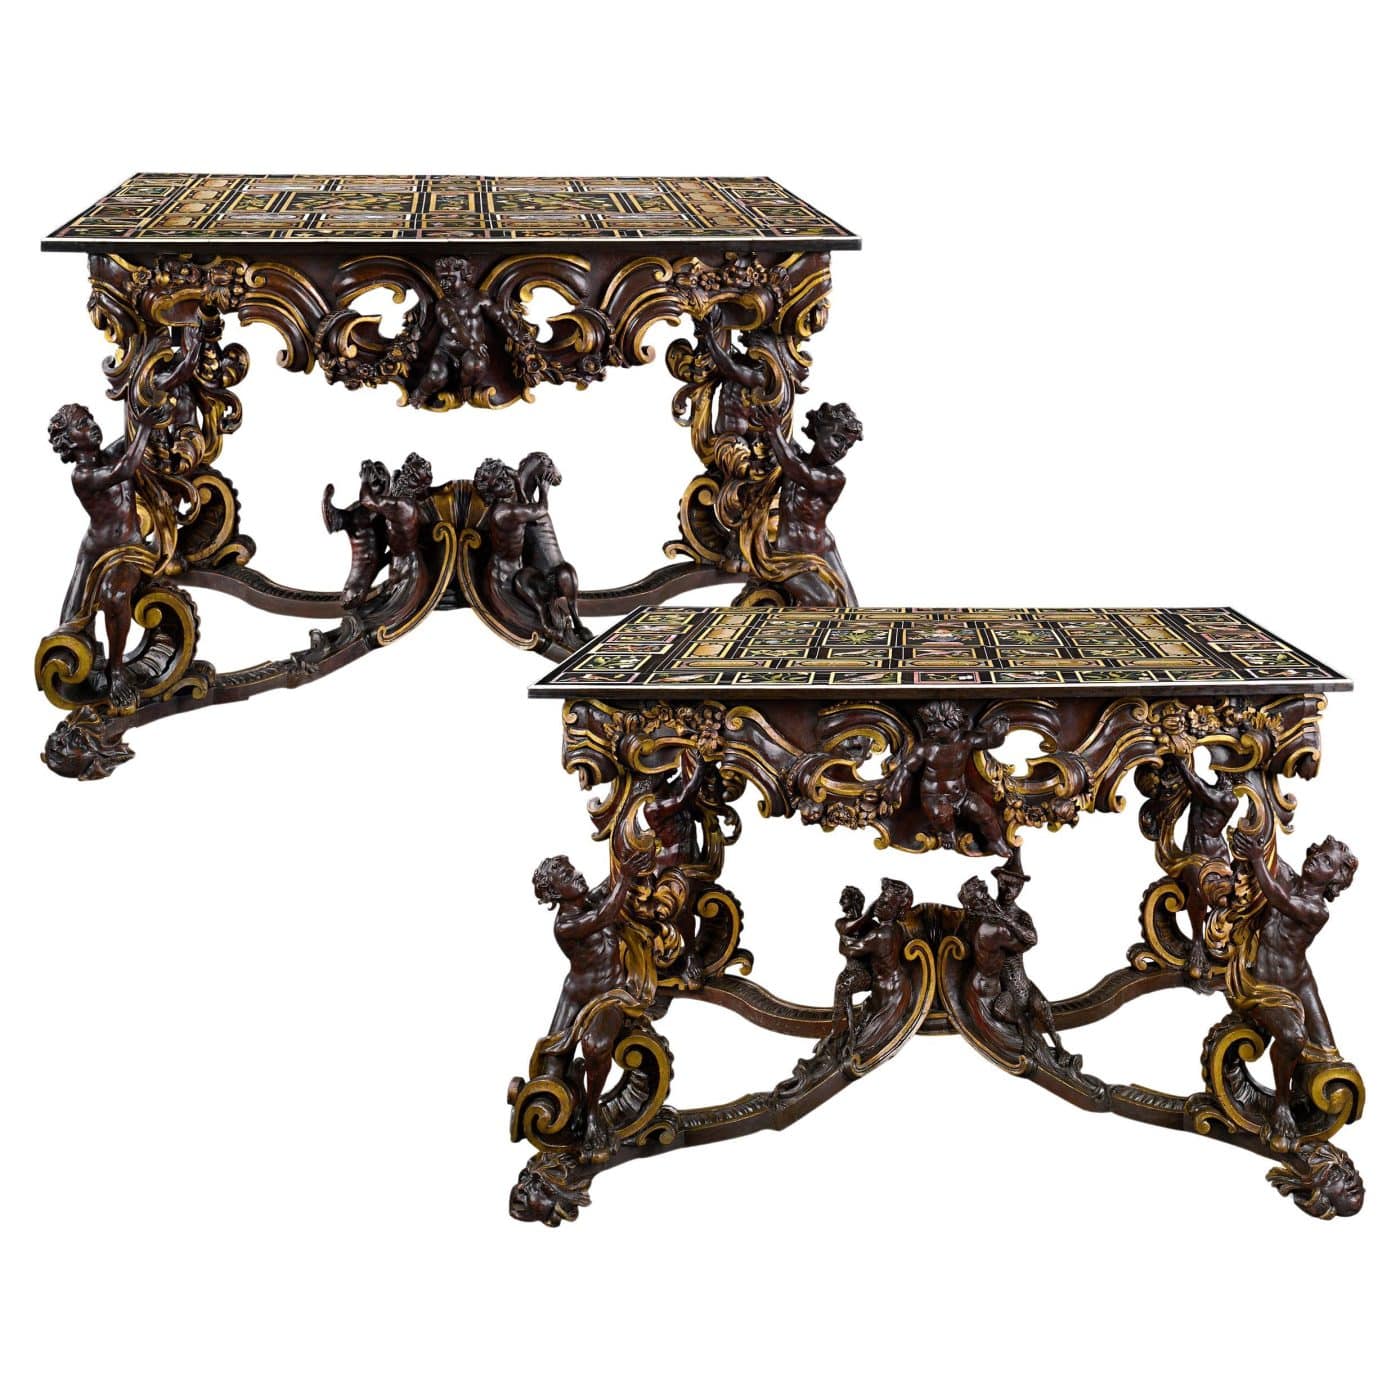 Grand Ducal tables